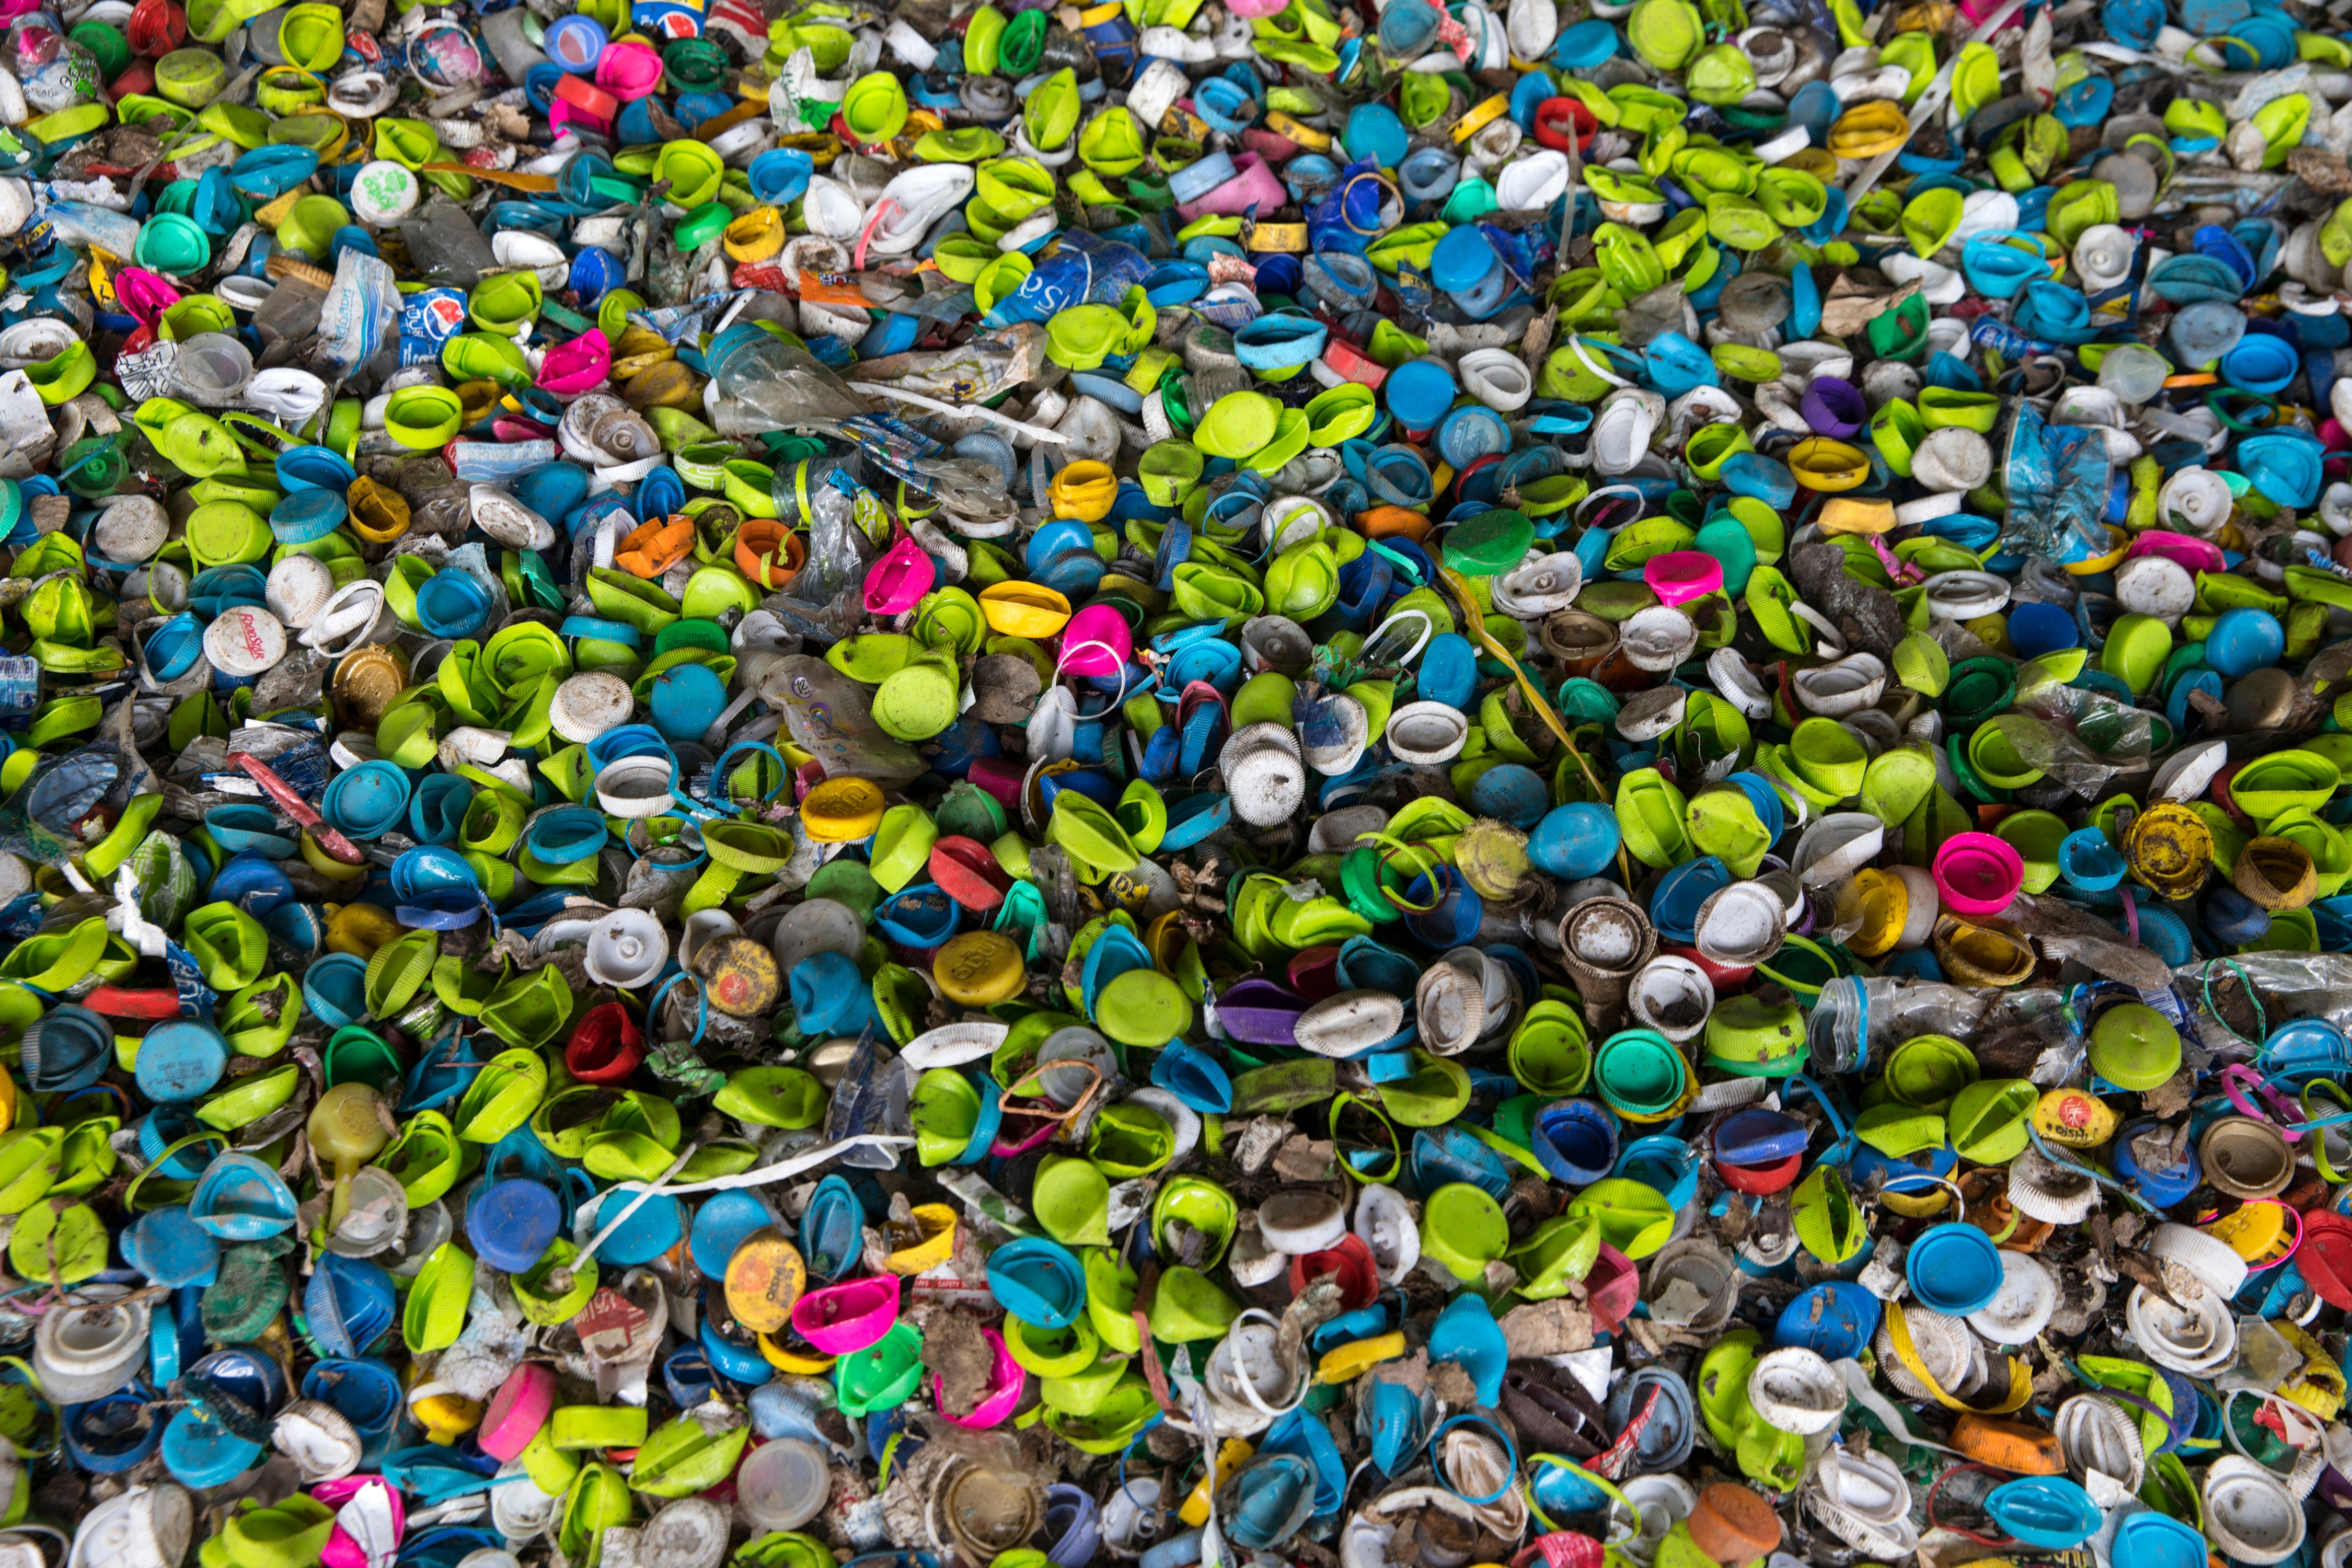 Plastic bottle caps made from HDPE in a recycling processing facility in Nakon Pathom, Thailand. (Photo: Paula Bronstein, Getty Images)